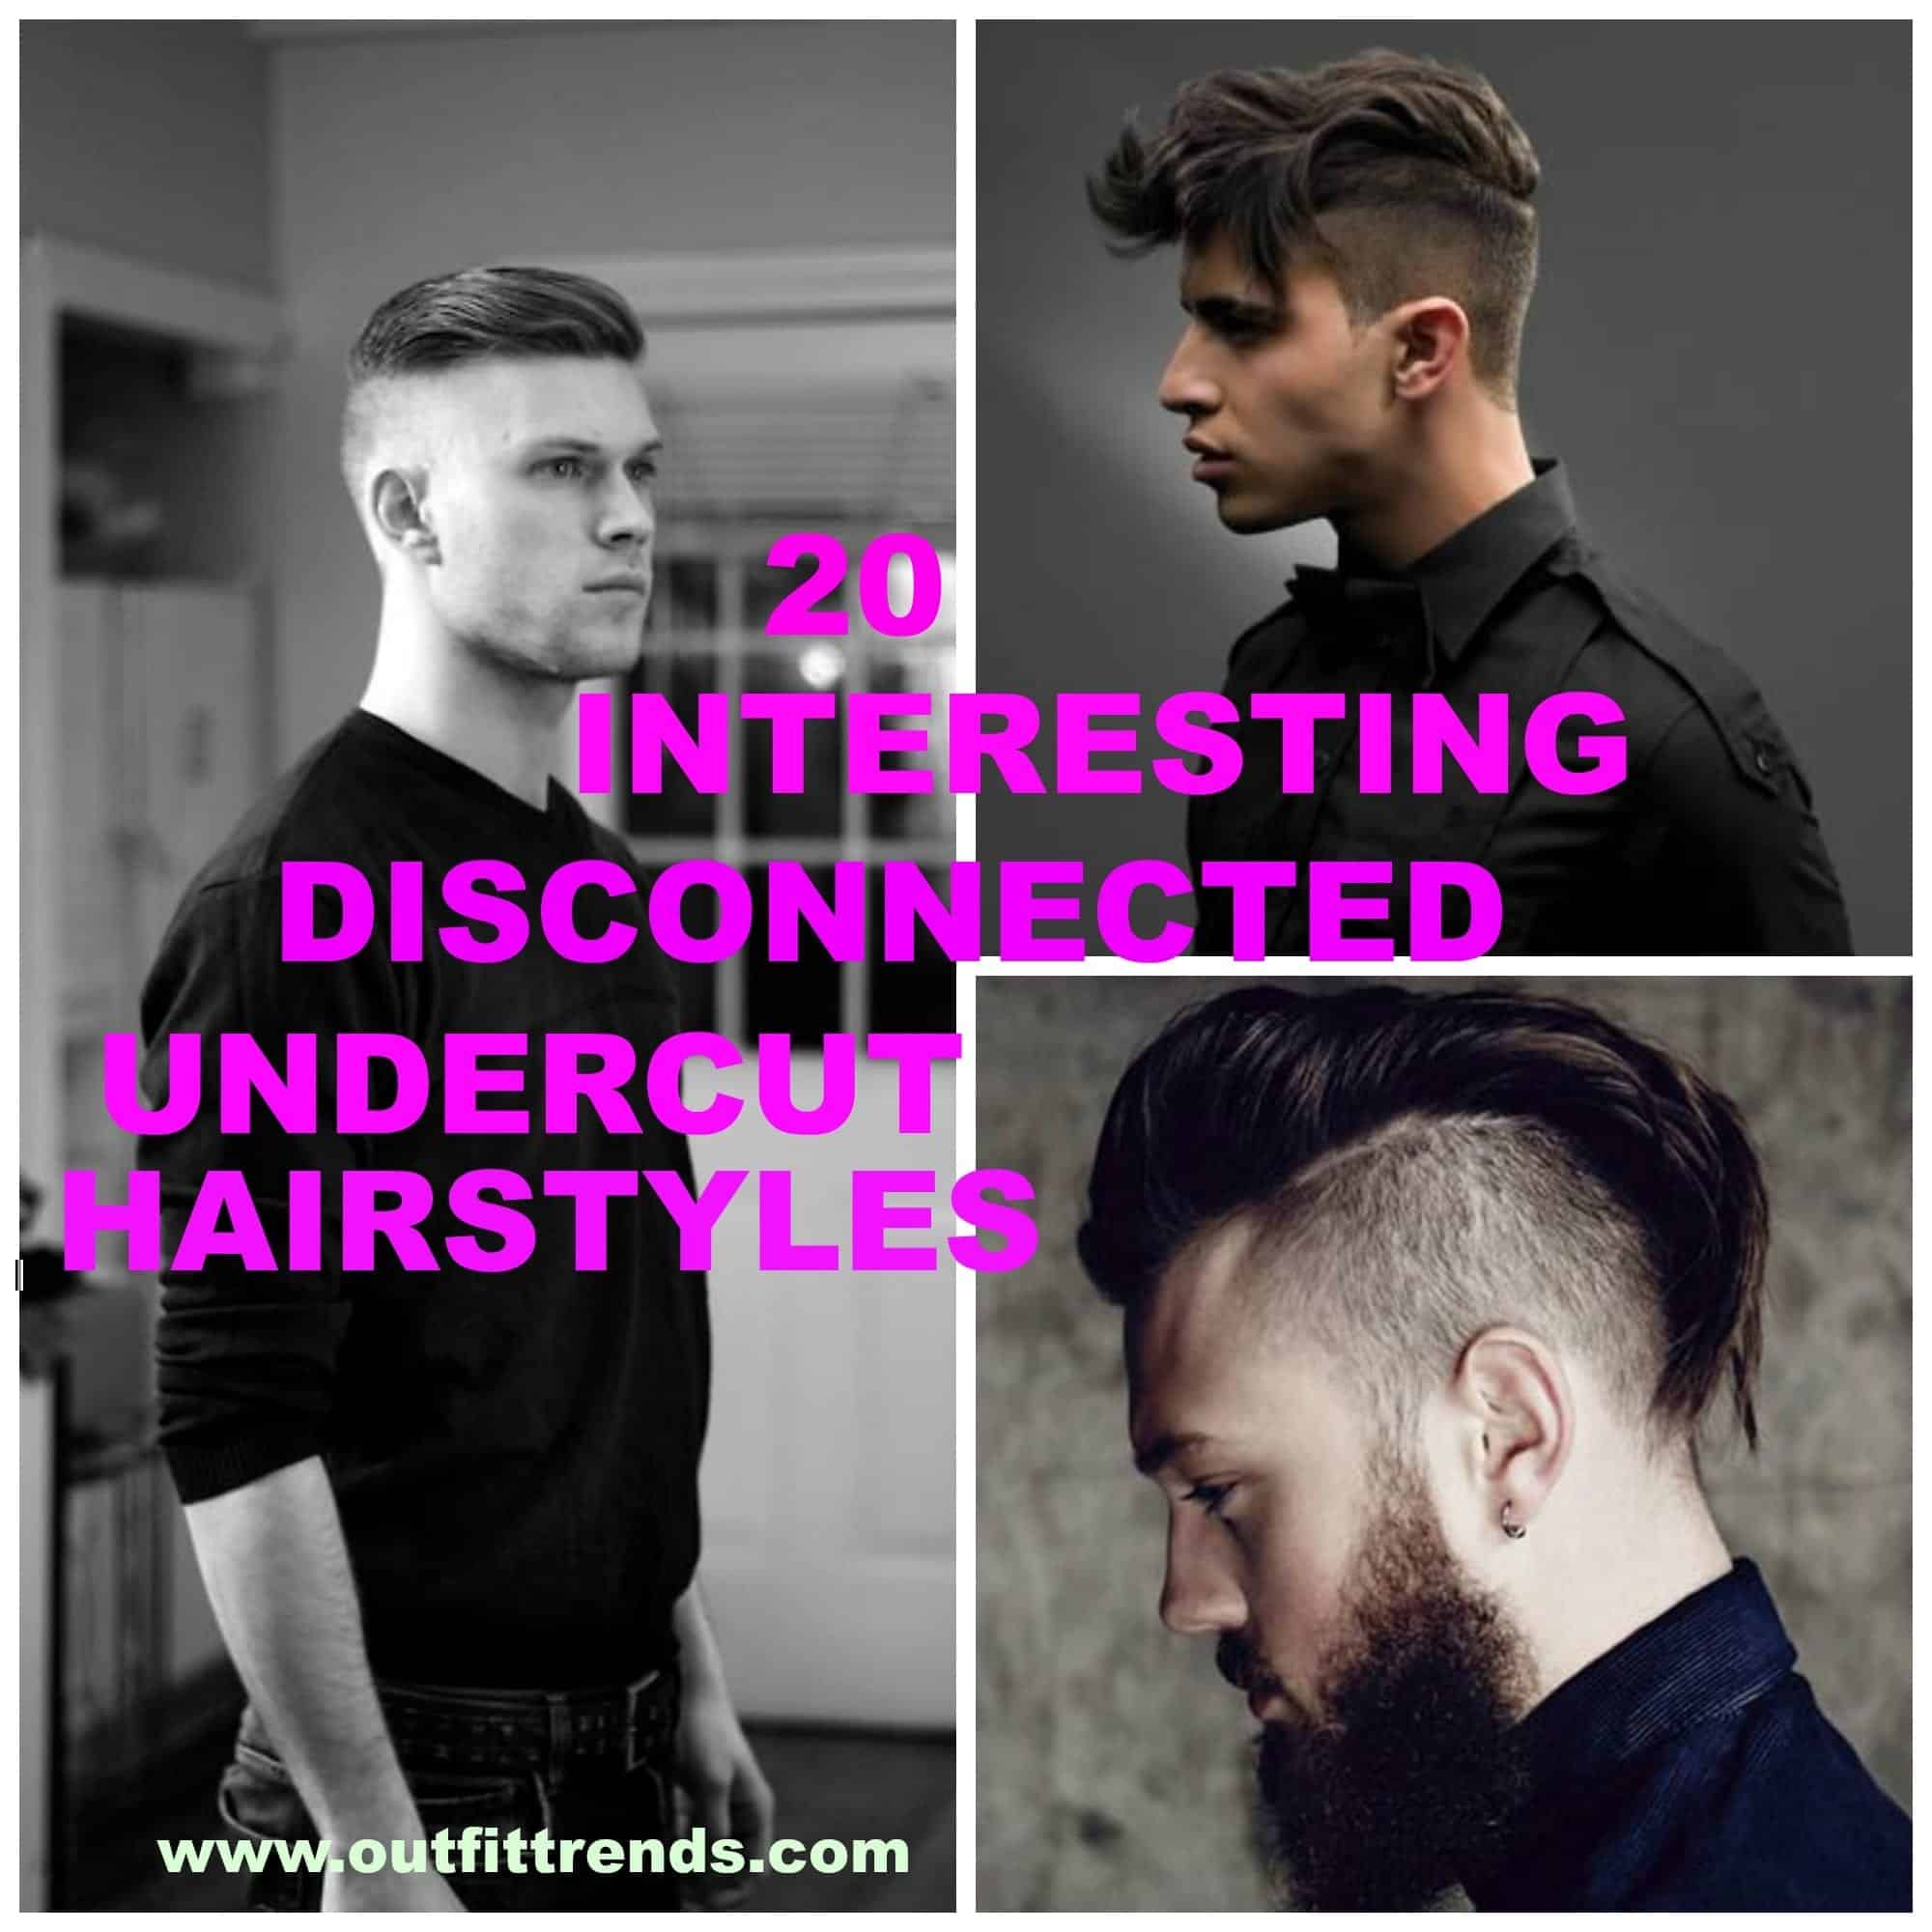 Disconnected Undercut Hairstyles For Men 20 New Styles and Tips